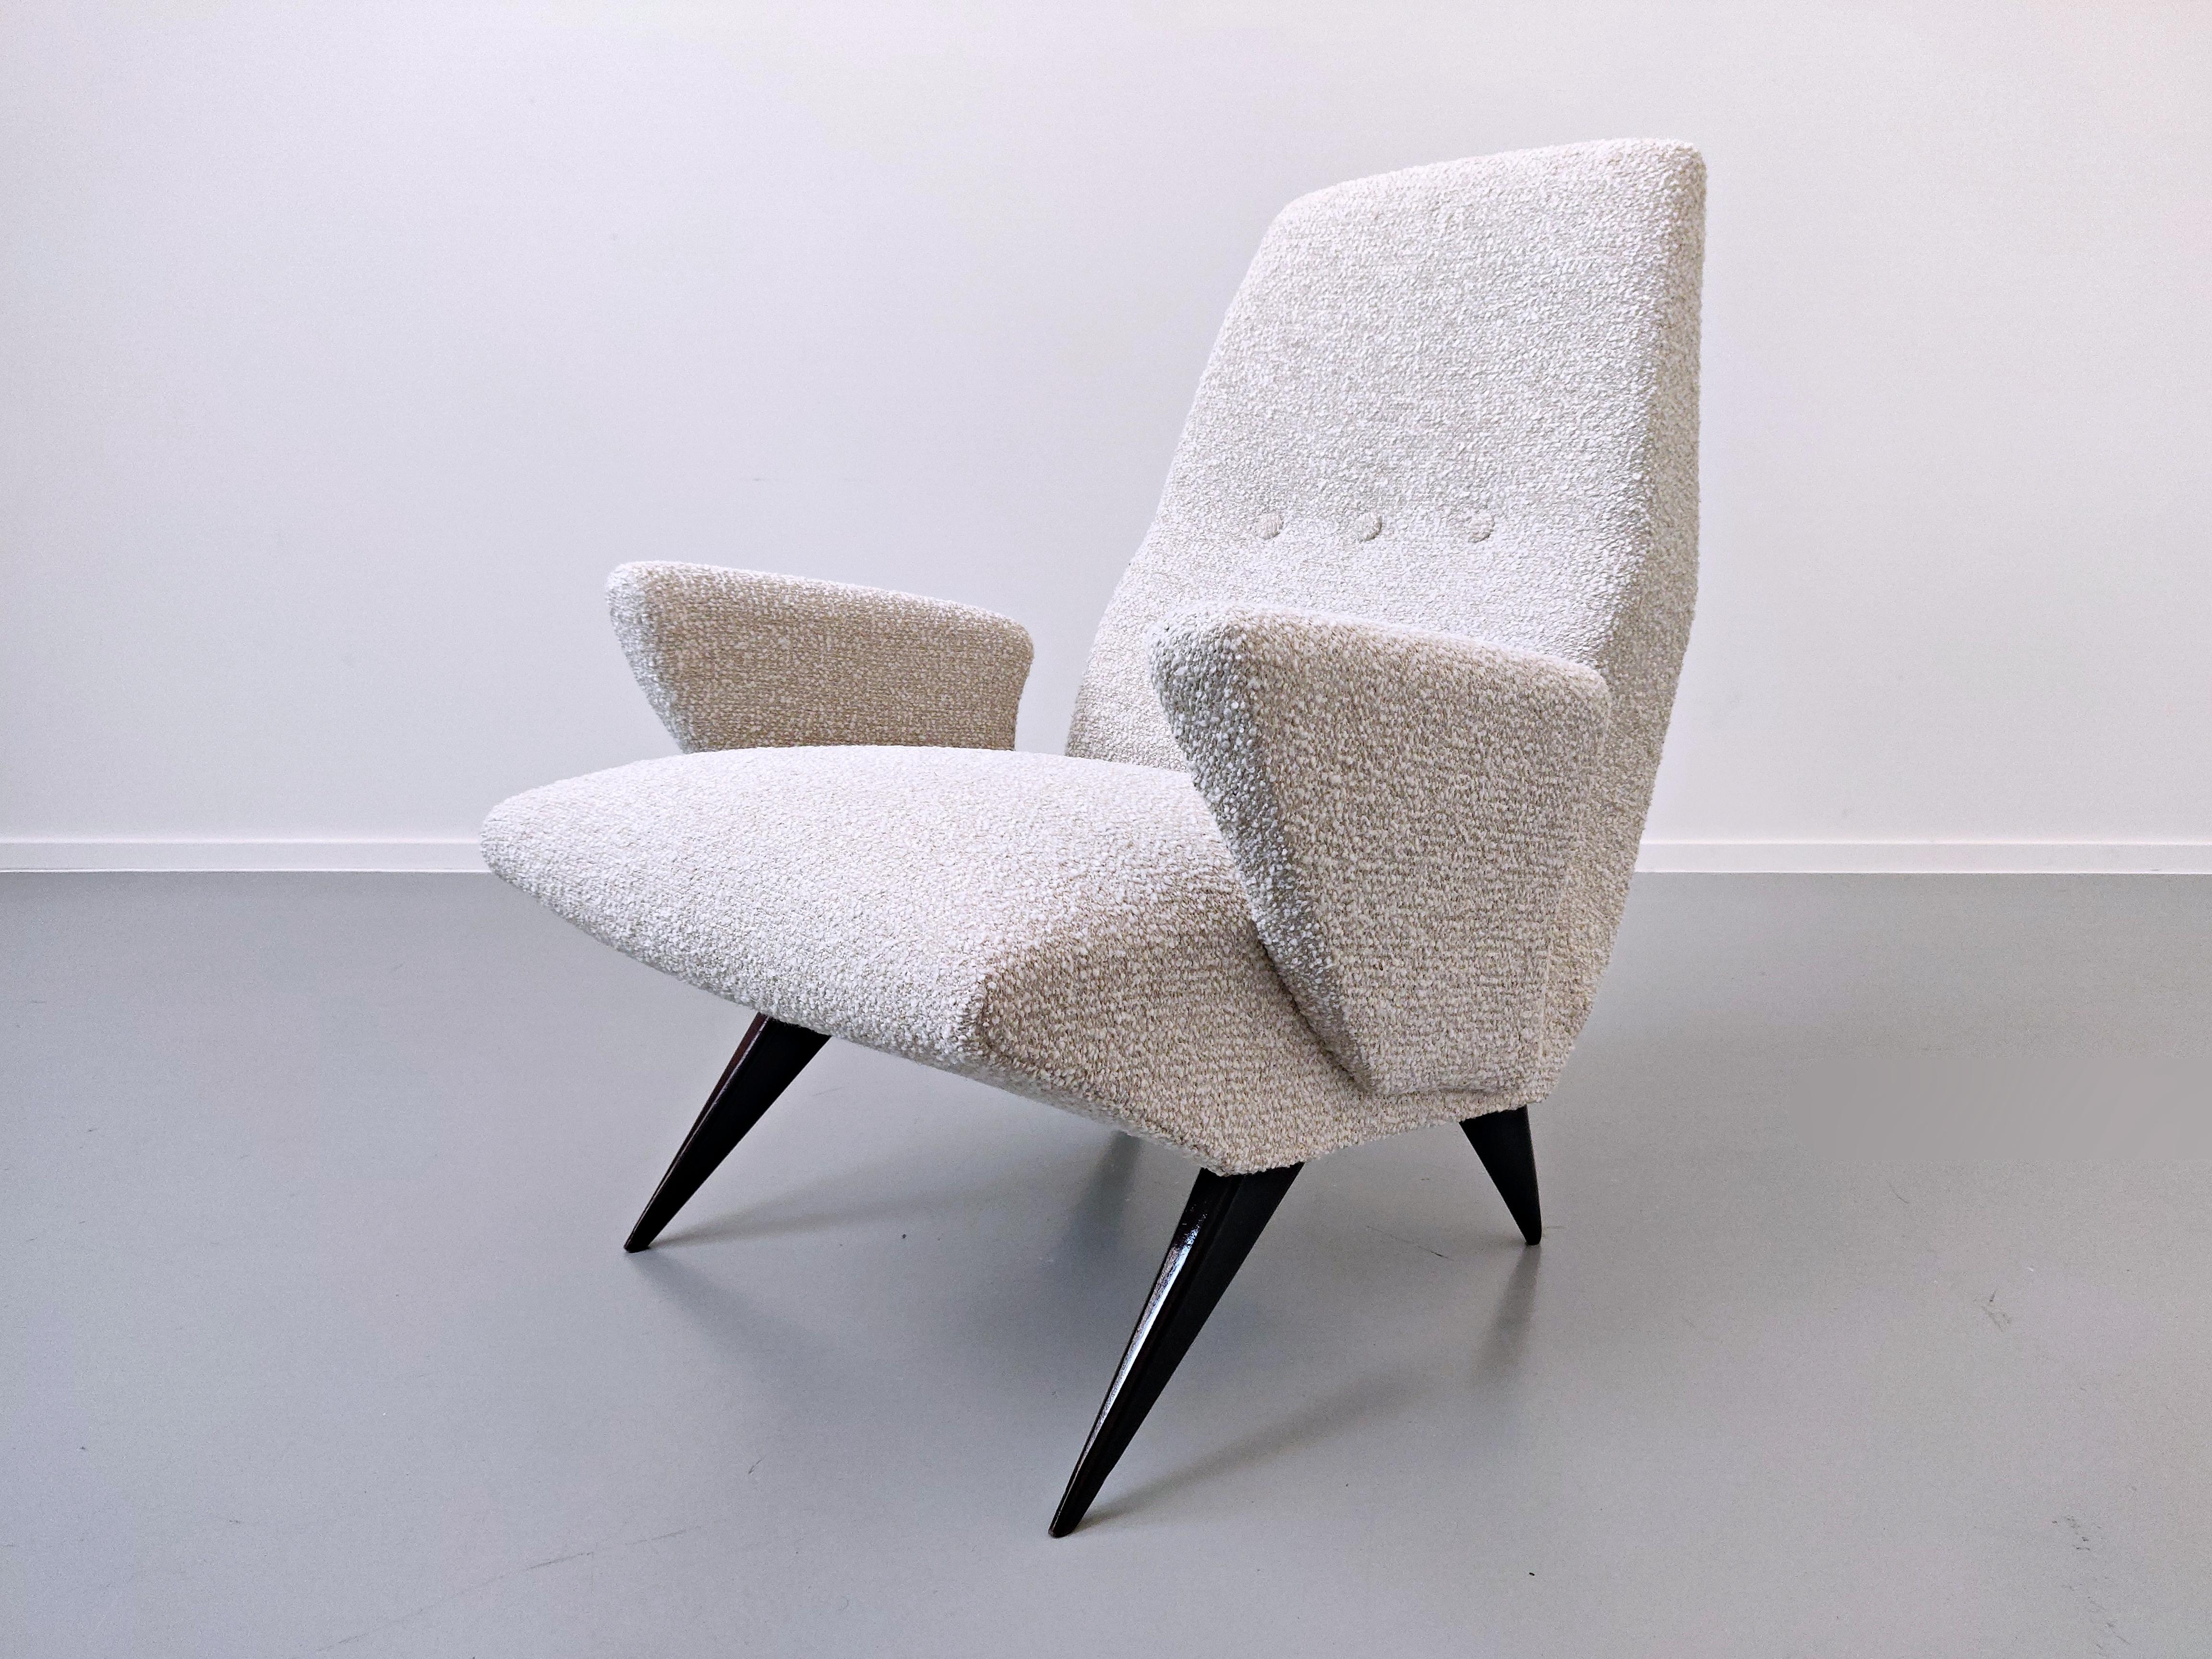 Pair of Mid-Century Modern  Armchairs by Nino Zoncada for Frimar, Italy  For Sale 1